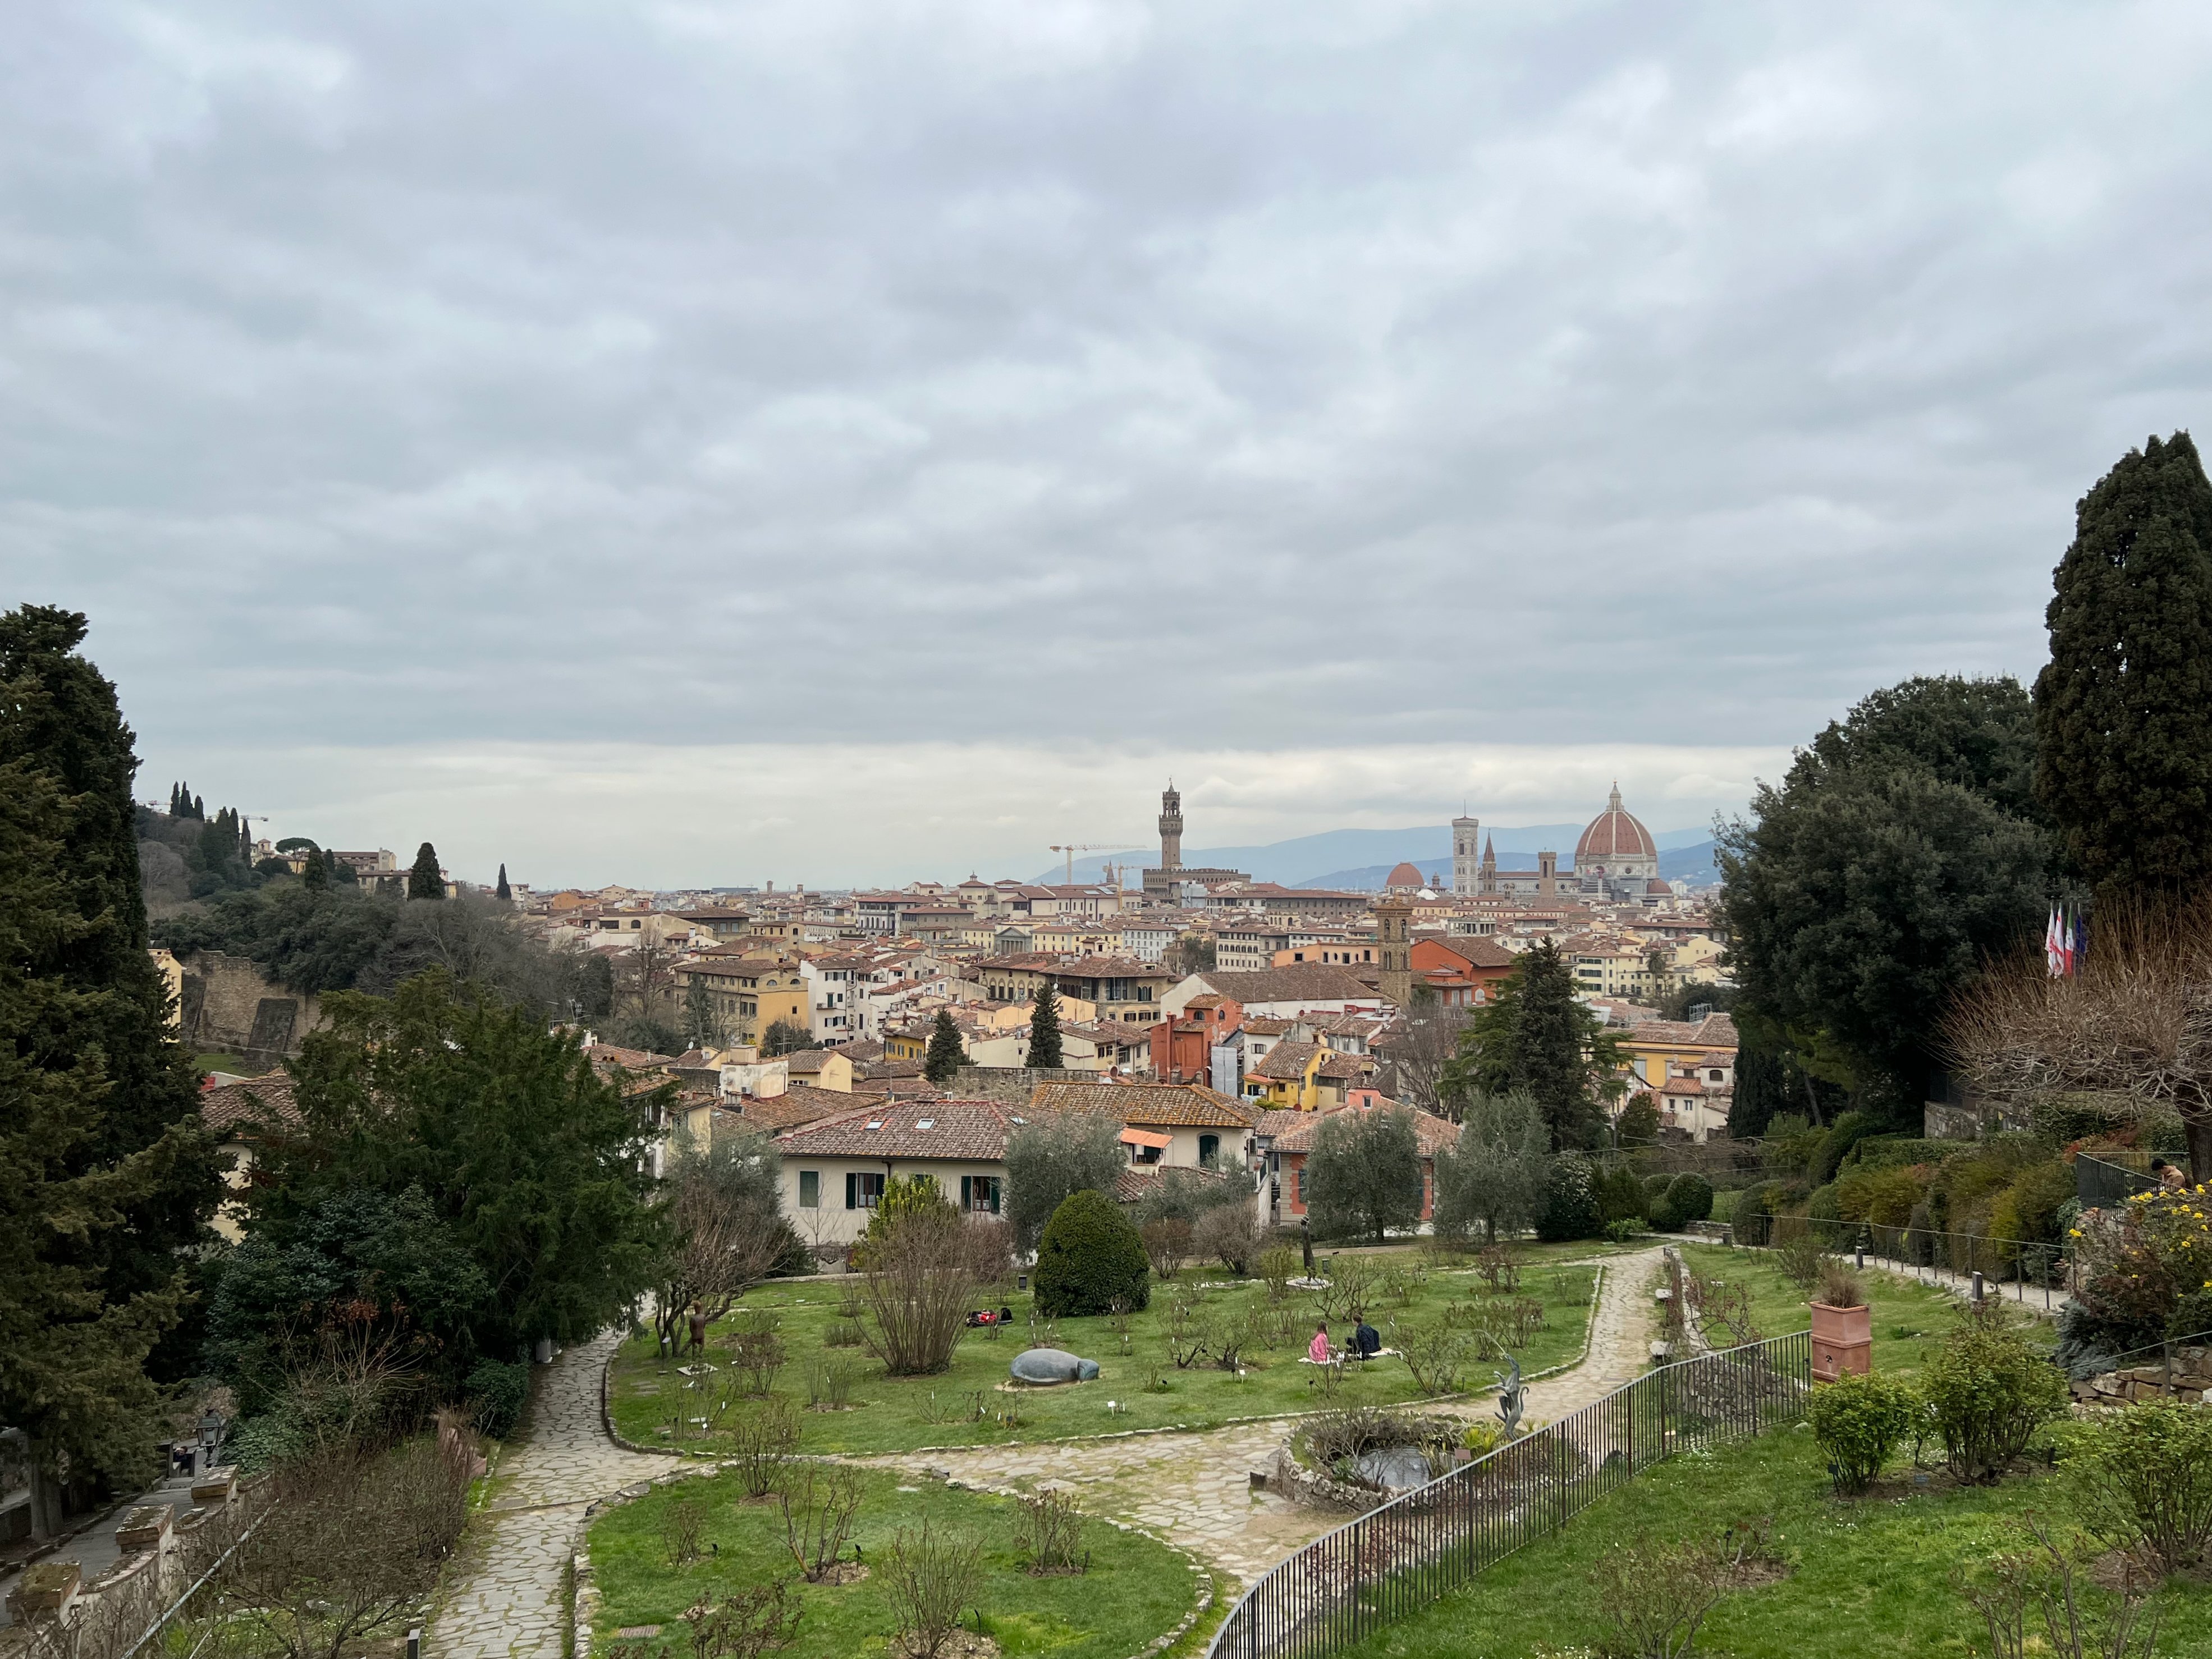 View on the way to Piazzale Michelangelo